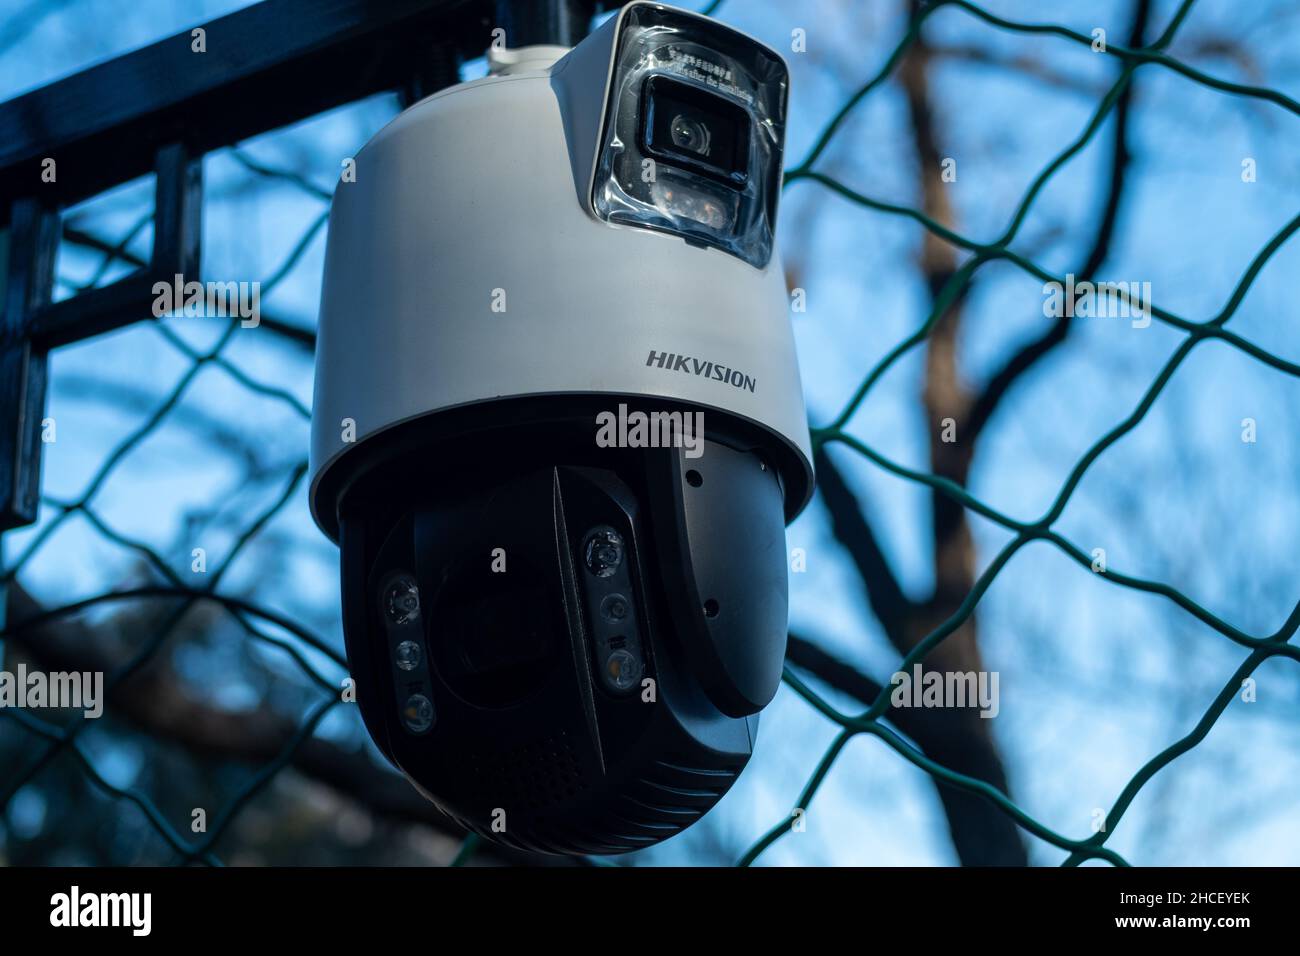 CCTV camera (Hikvision) is seen in Beijing, China. Stock Photo